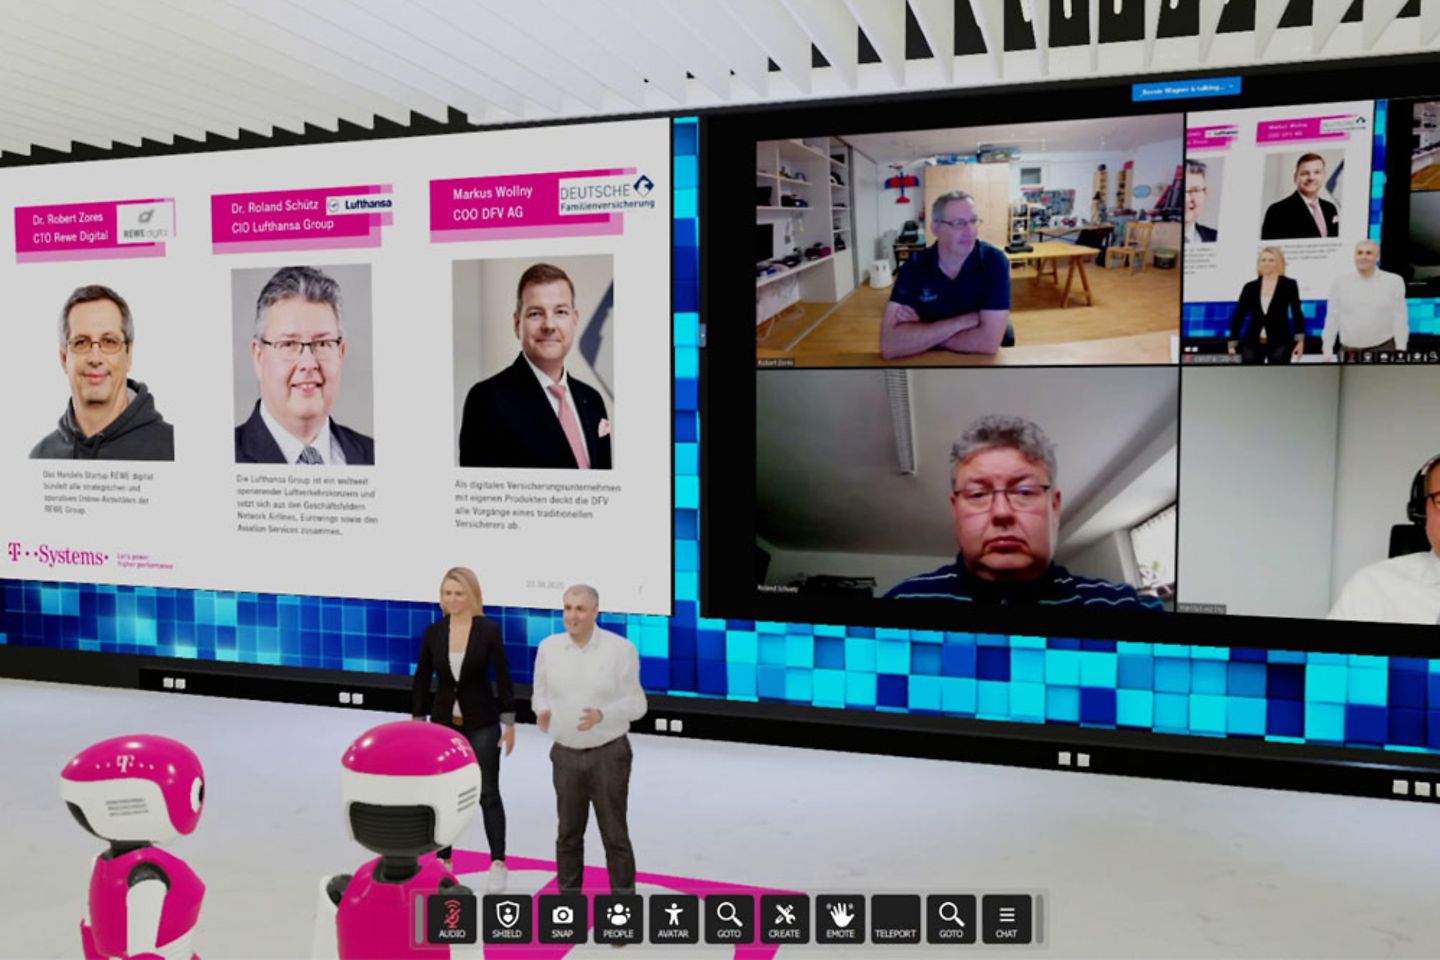 Video conference in a virtual room with two people on one screen via a web cam and two virtual moderators